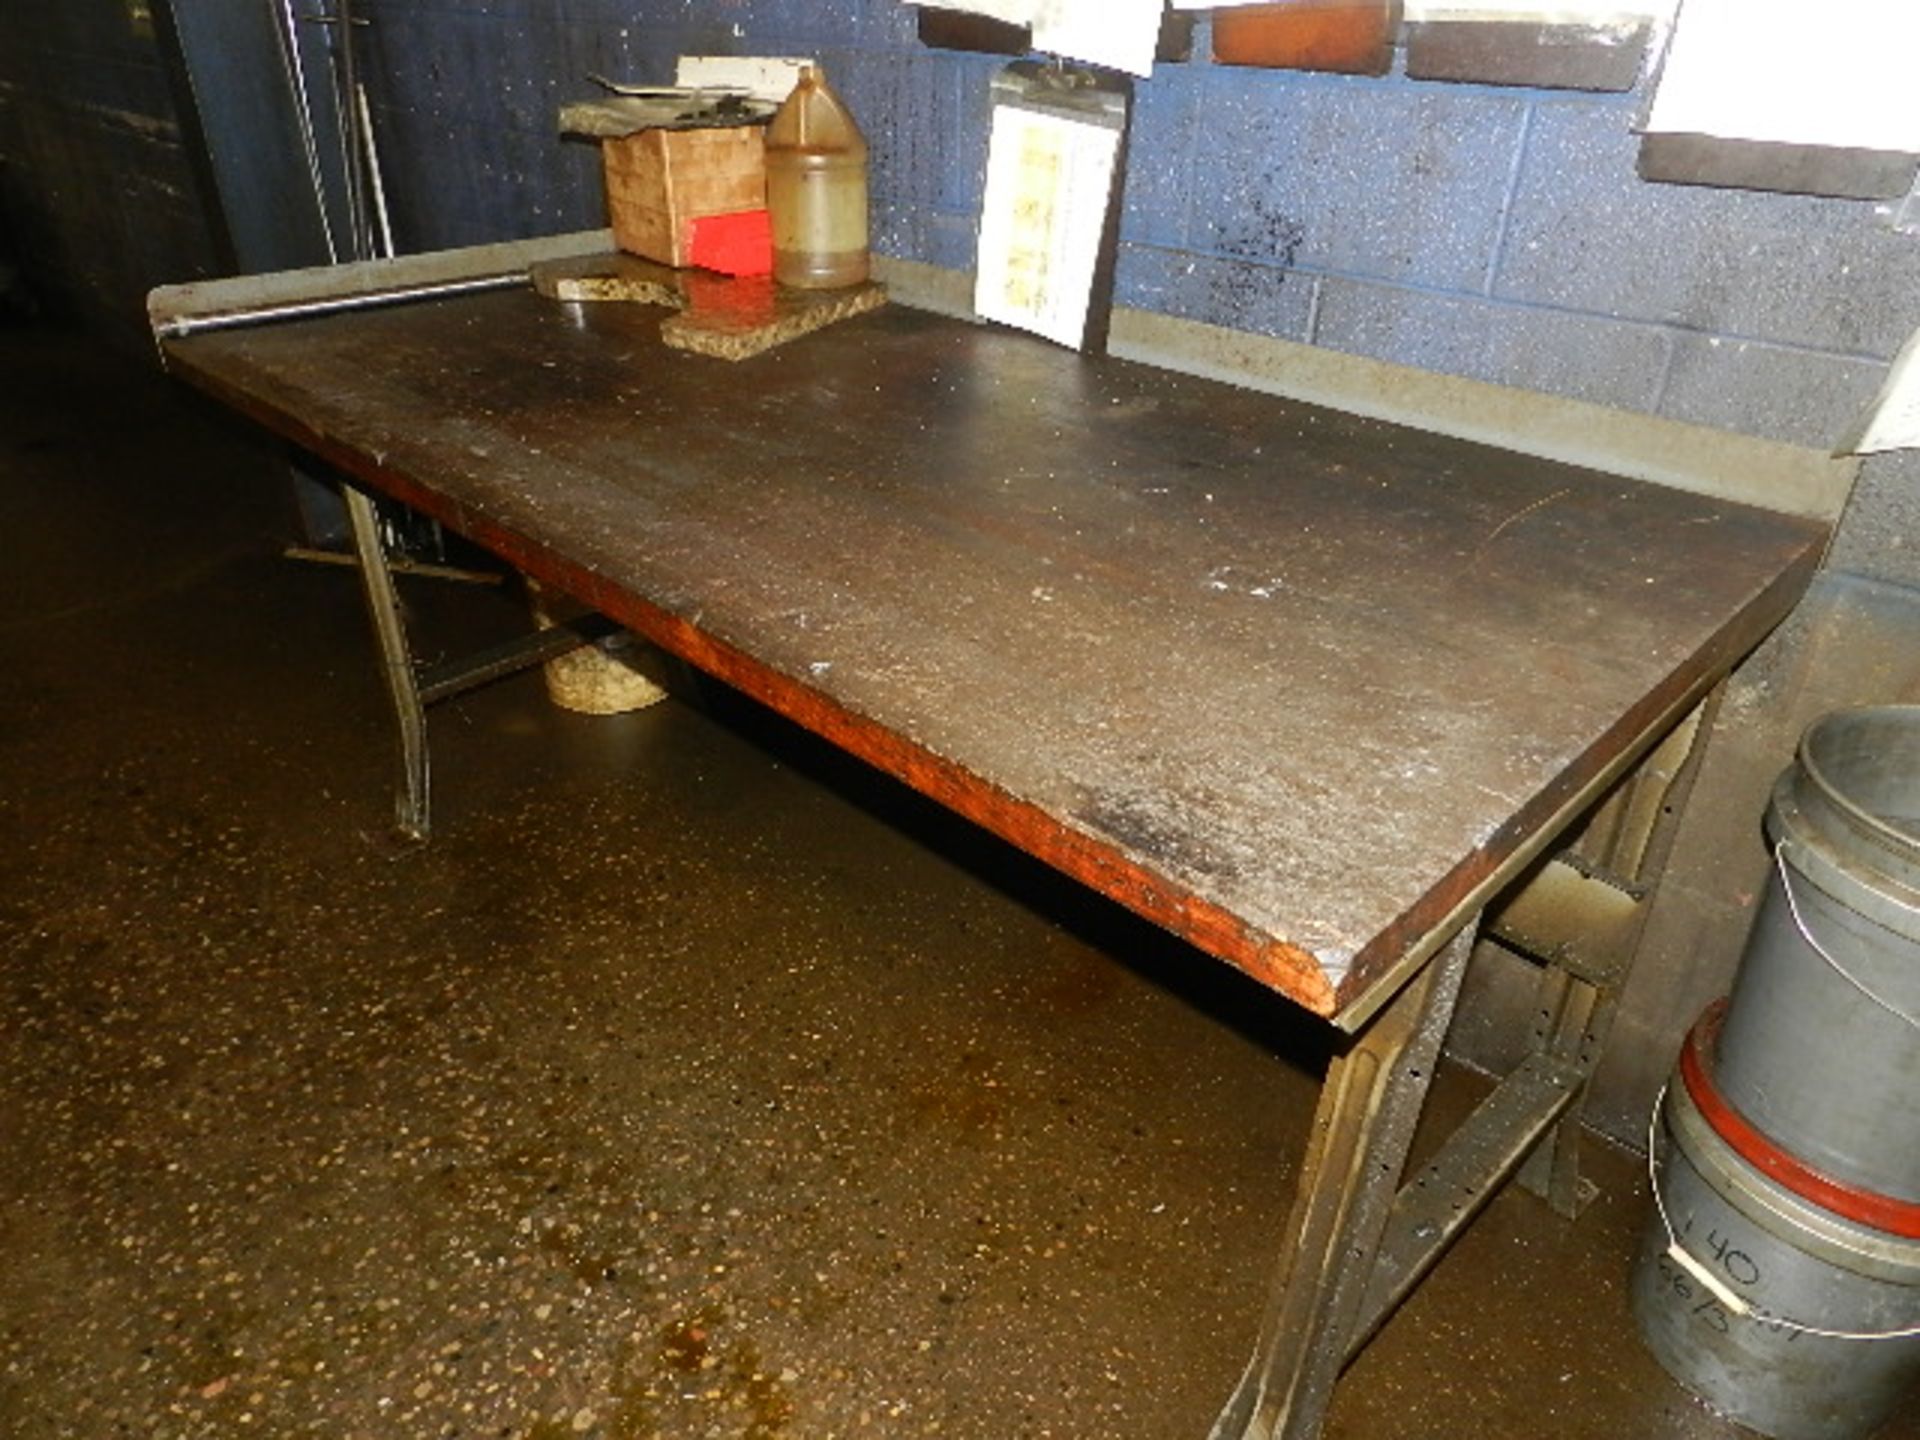 (1) 6' LONG WORK BENCH, (1) 5' LONG WORK BENCH, STOOL, AND CONTENTS ON TABLE (A) - Image 2 of 4